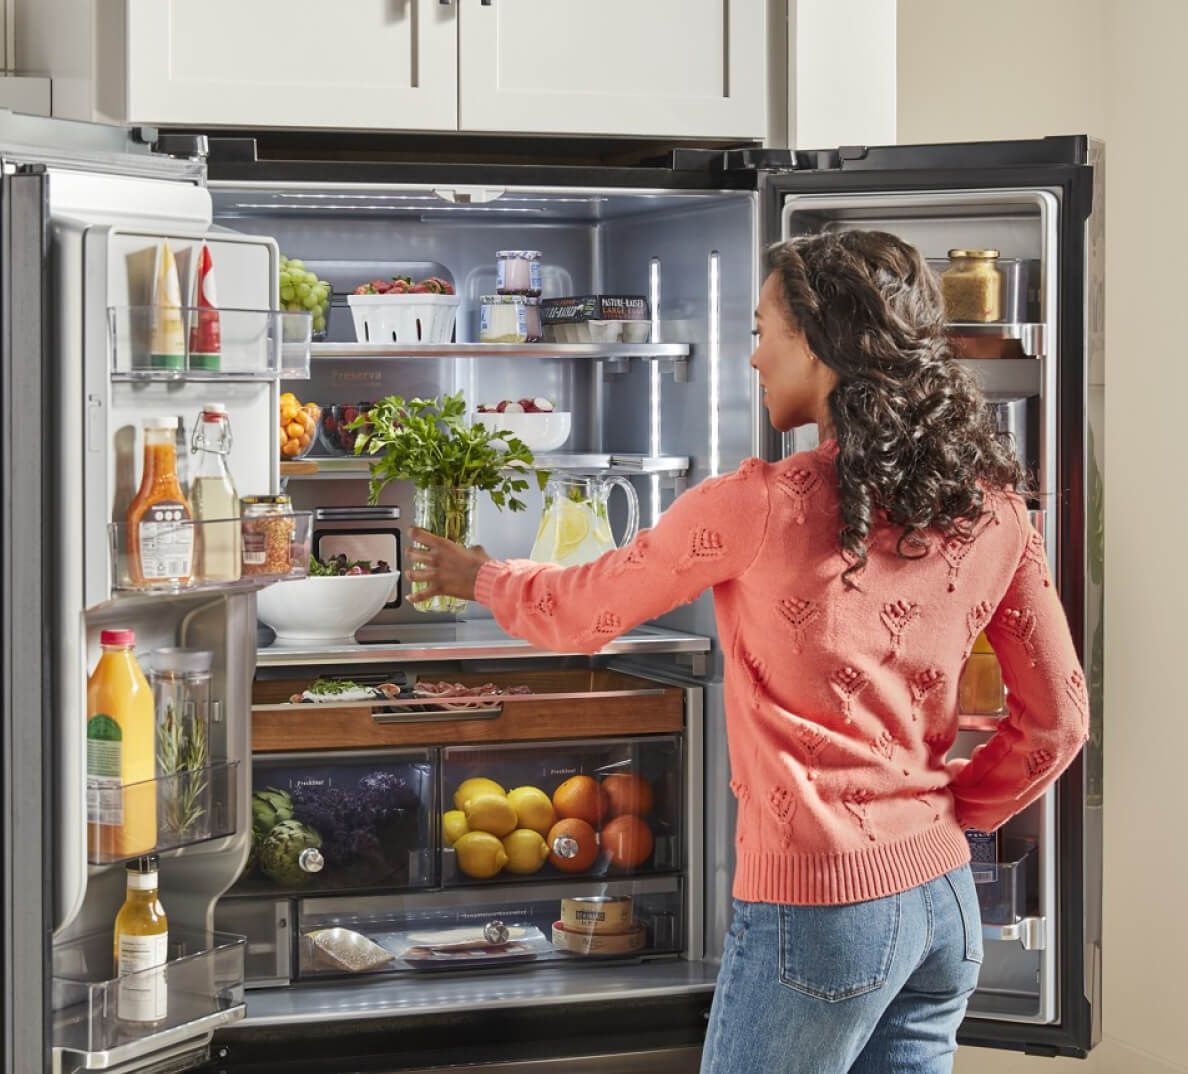 Woman reaching for produce in organized refrigerator.